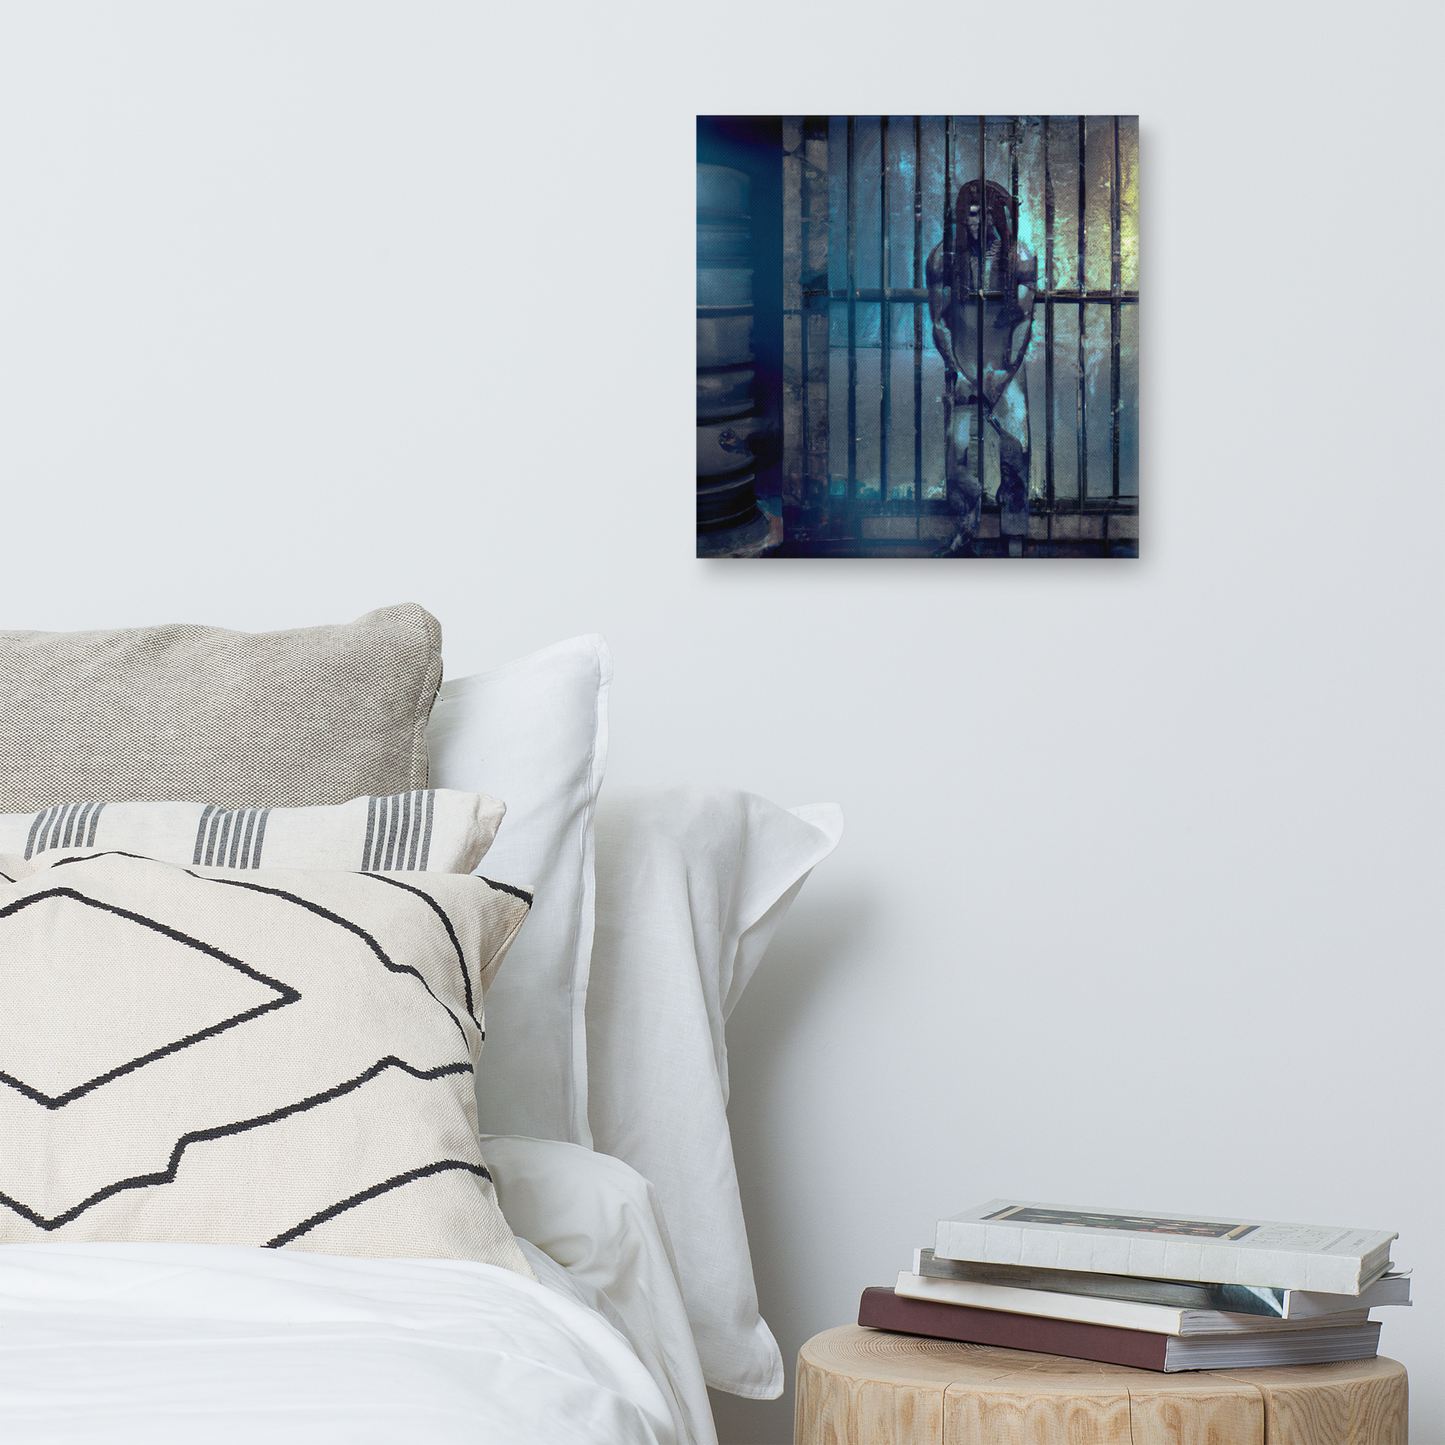 SOULED OUT "Cages 1" Canvas